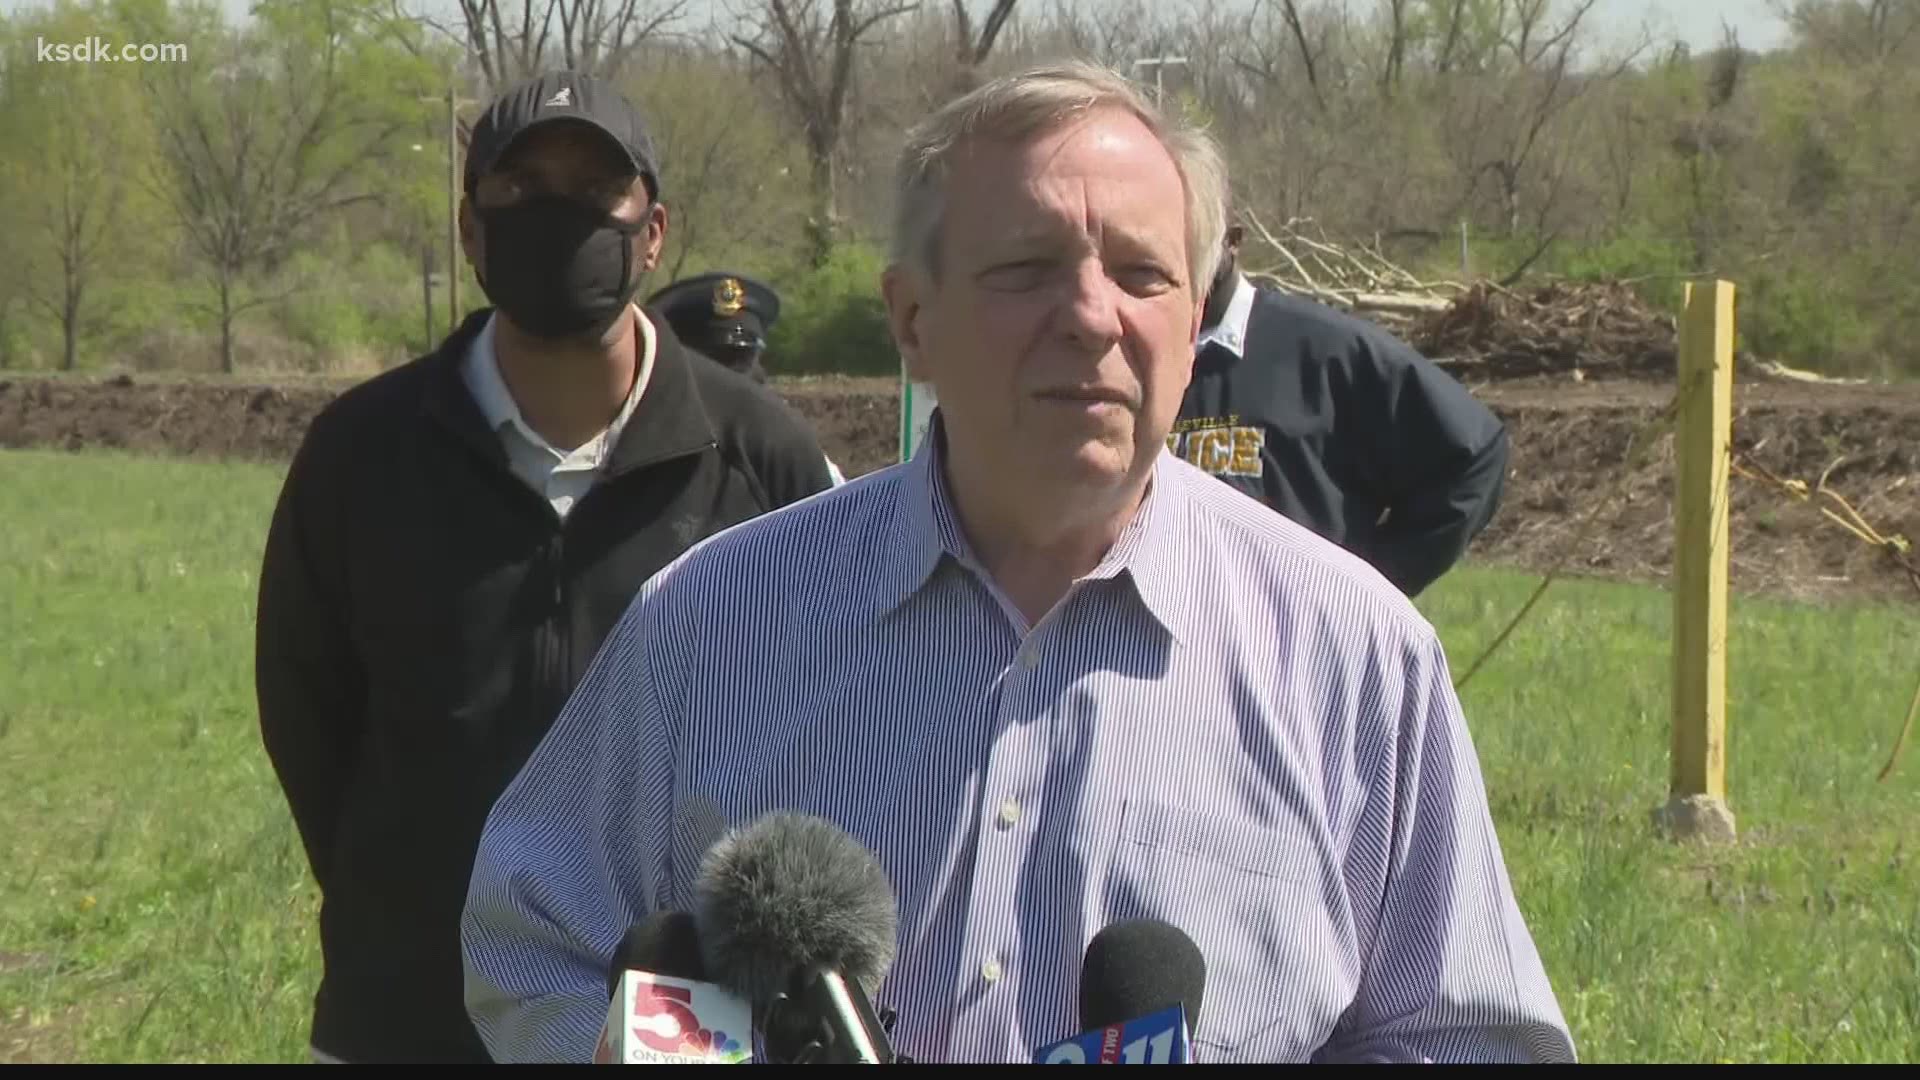 Sen. Dick Durbin is marshaling resources to clear out the 14-mile Harding Ditch